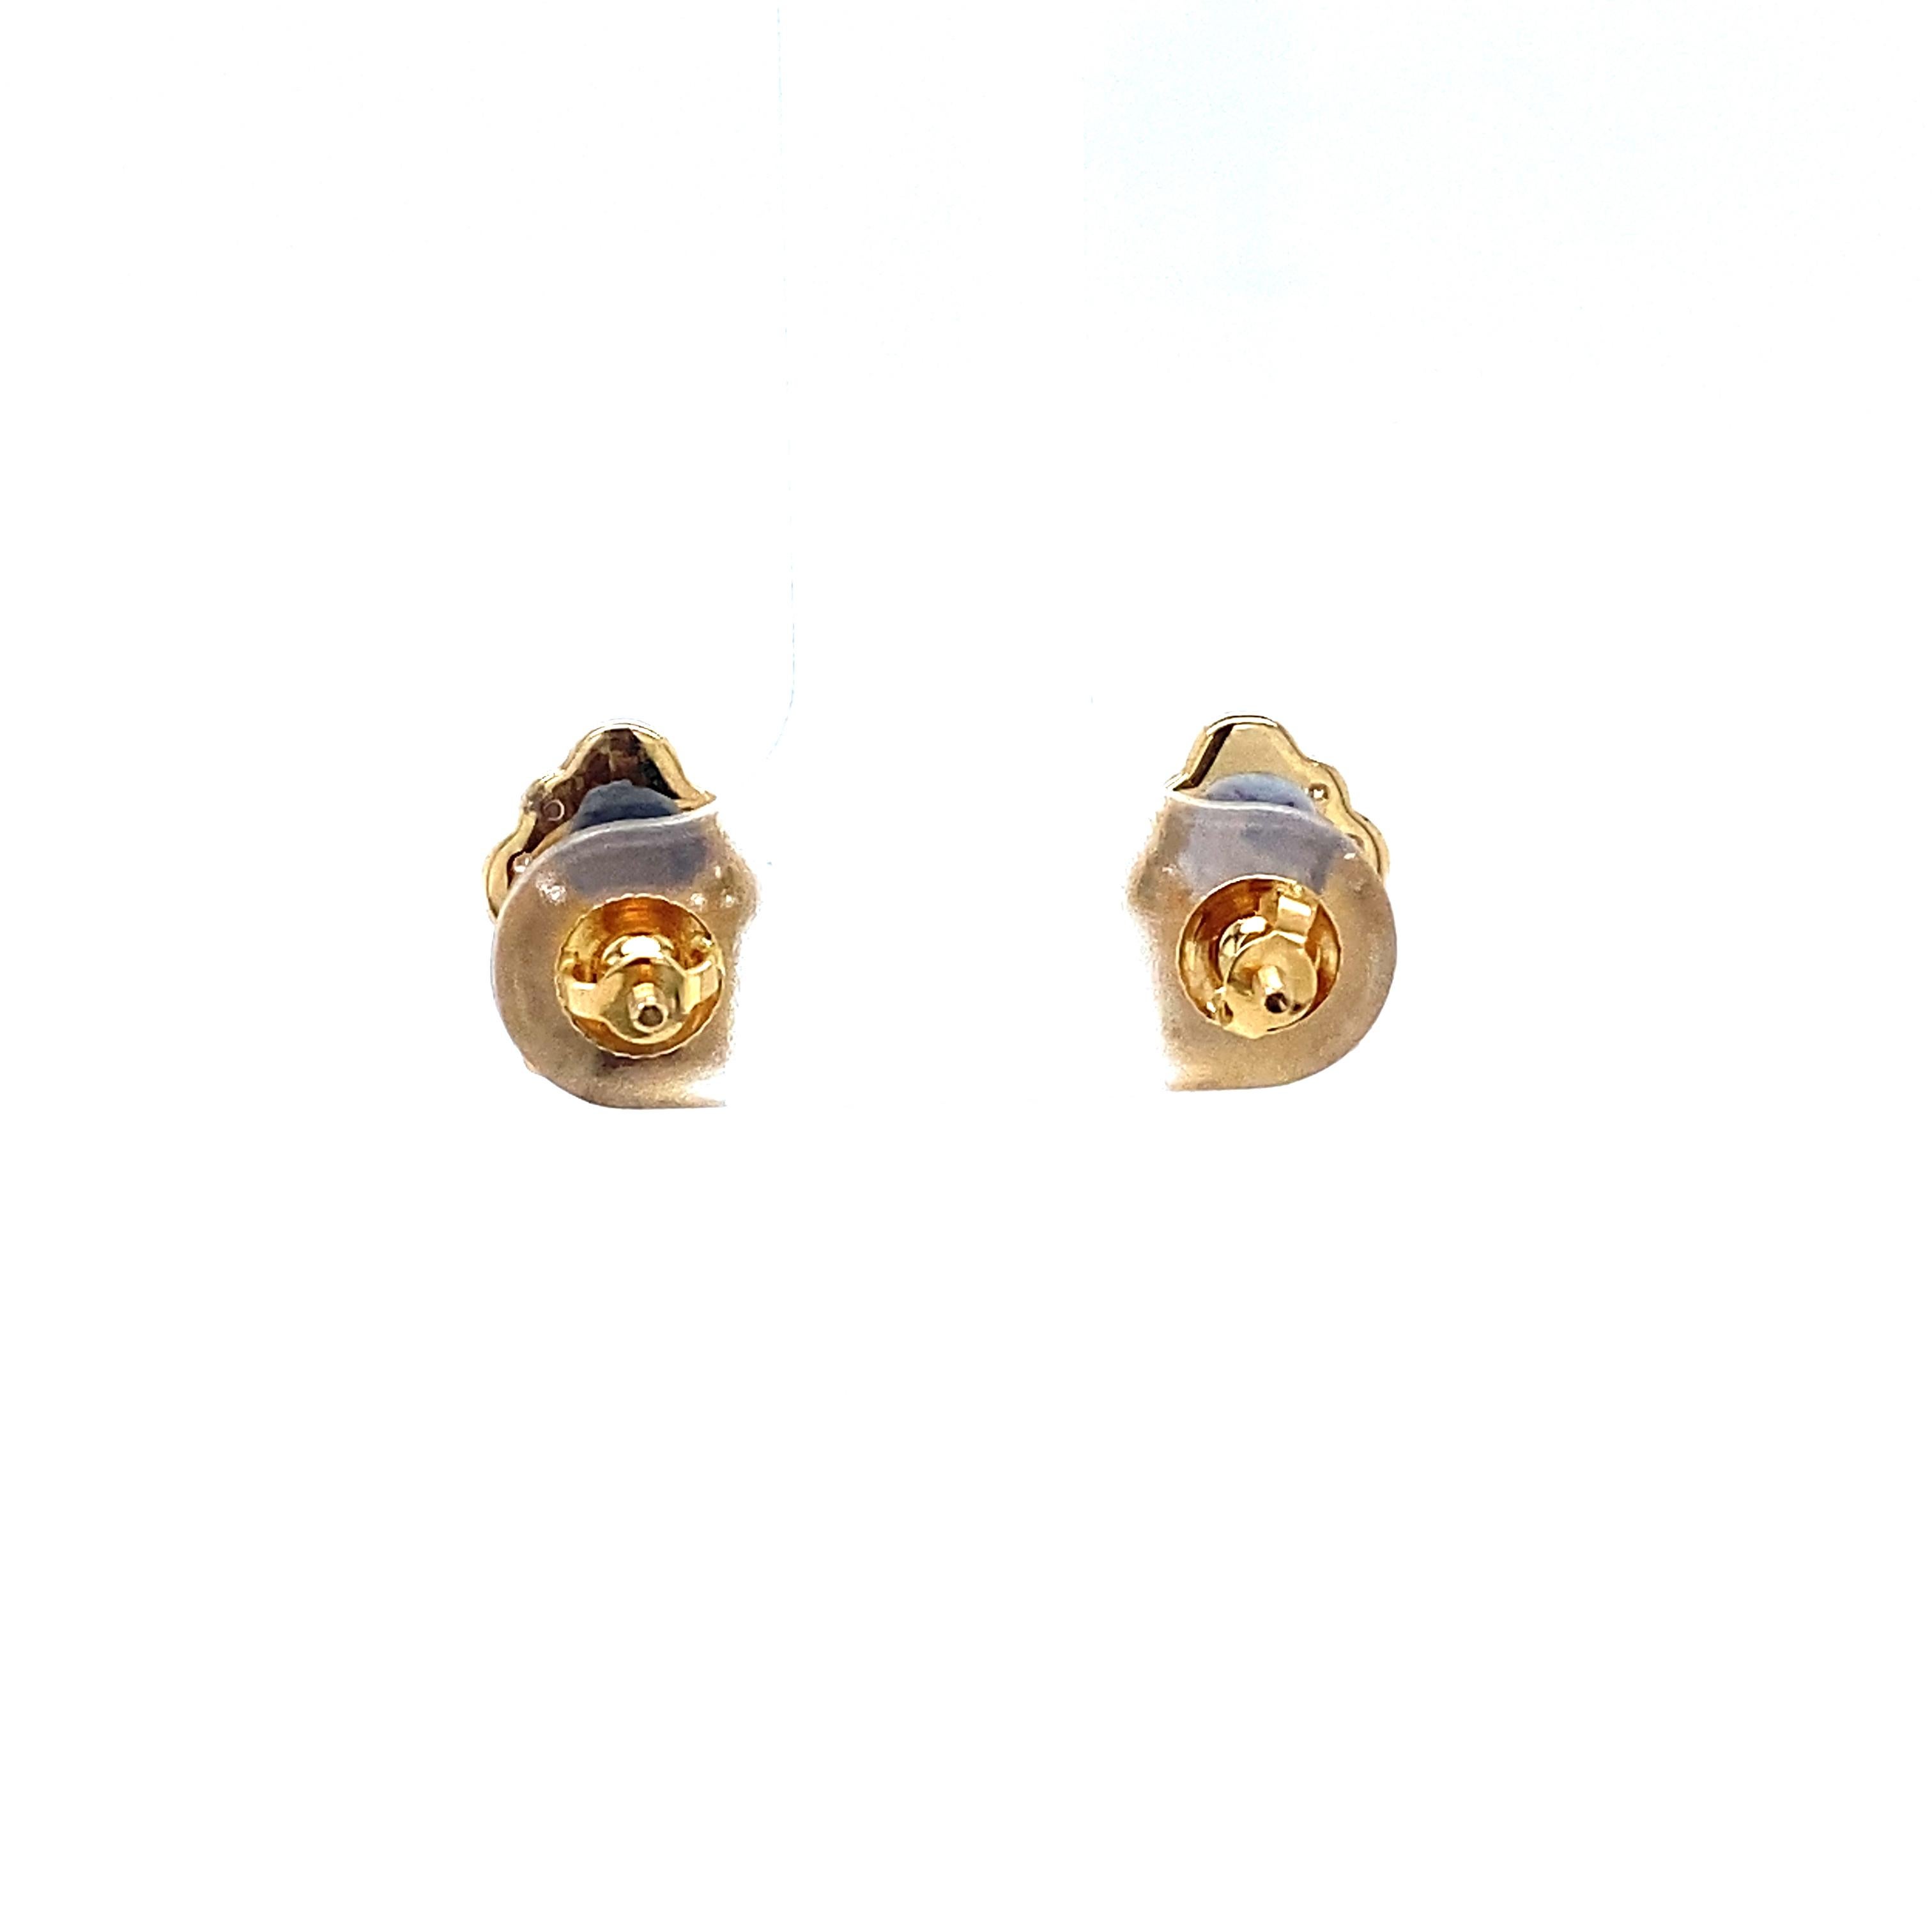 Round Cut Cute Enameled Cupcake Diamond Earrings for Girls/Kids/Toddlers in 18K Solid Gold For Sale